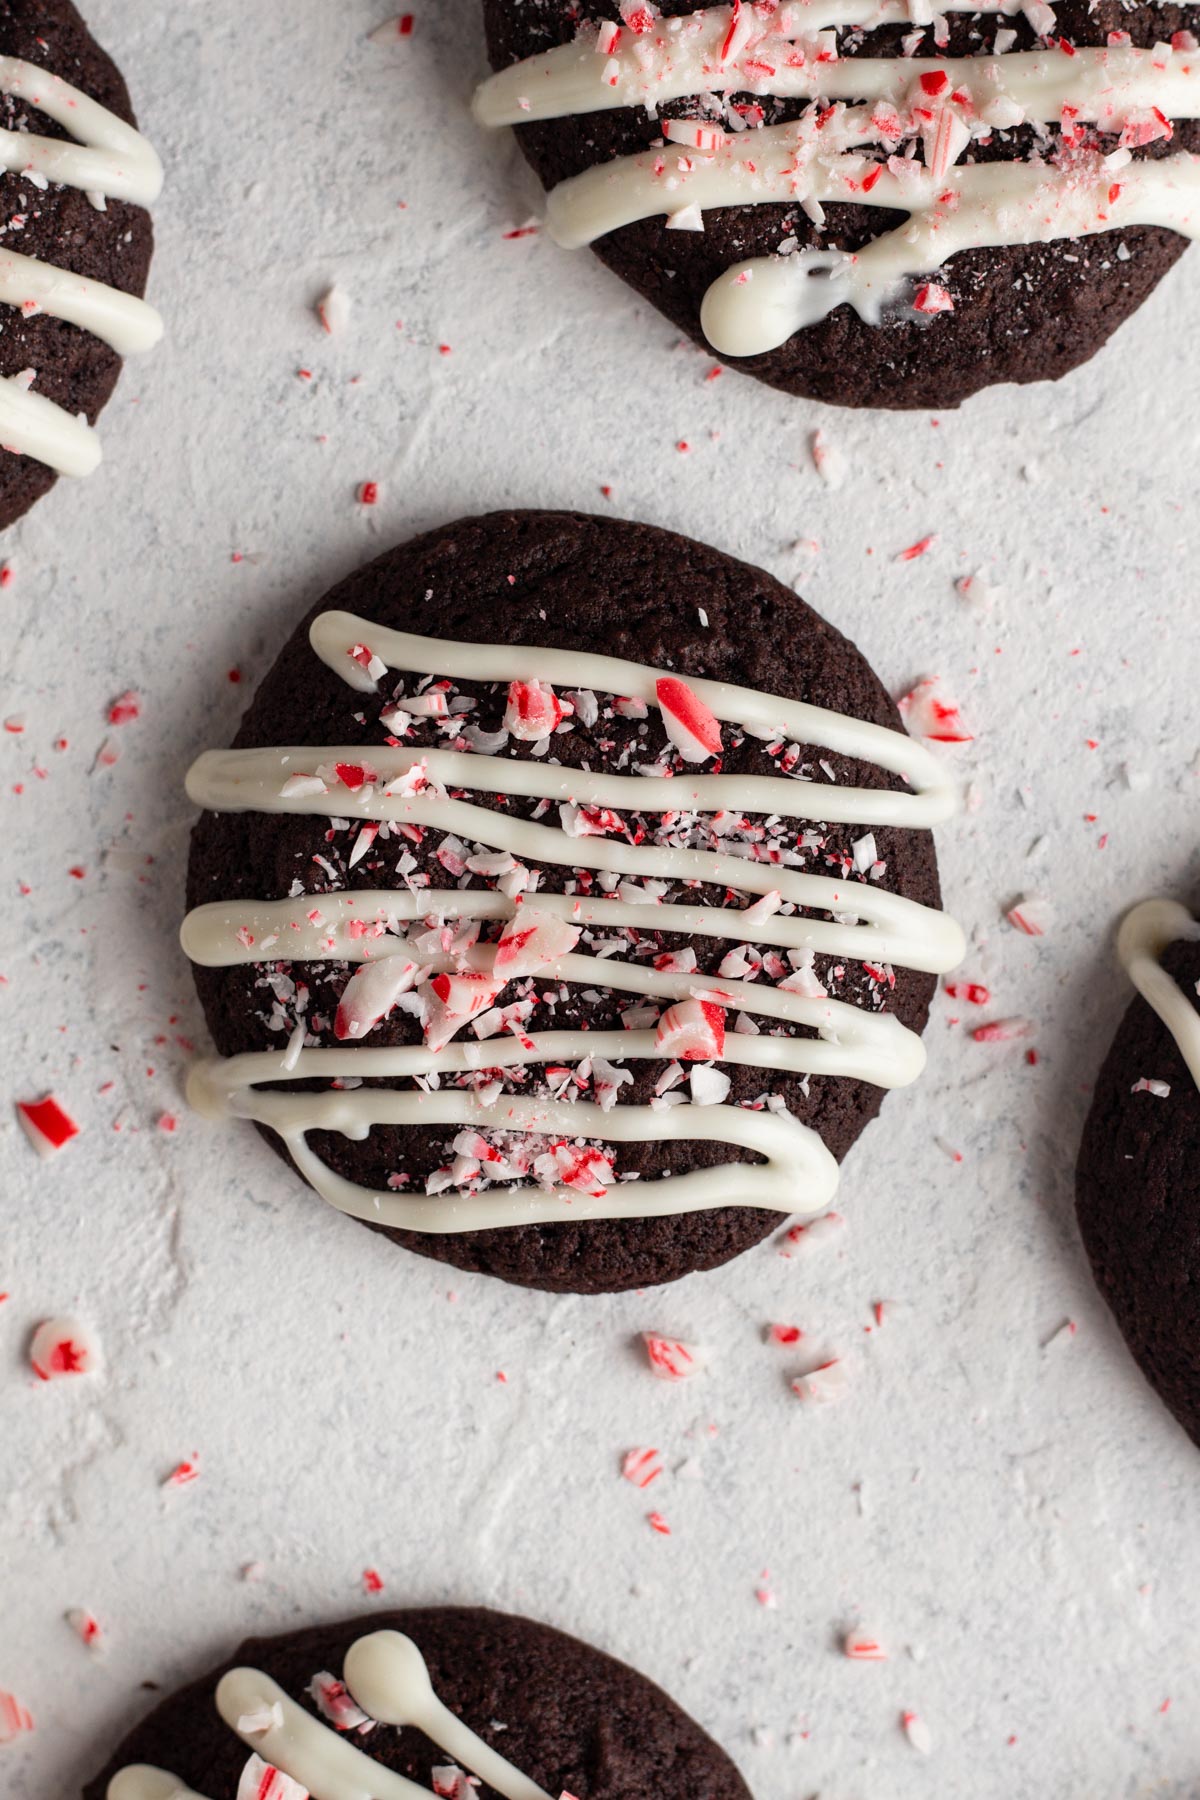 Overhead view of chocolate cookies with white chocolate and crushed candy canes on a white surface.